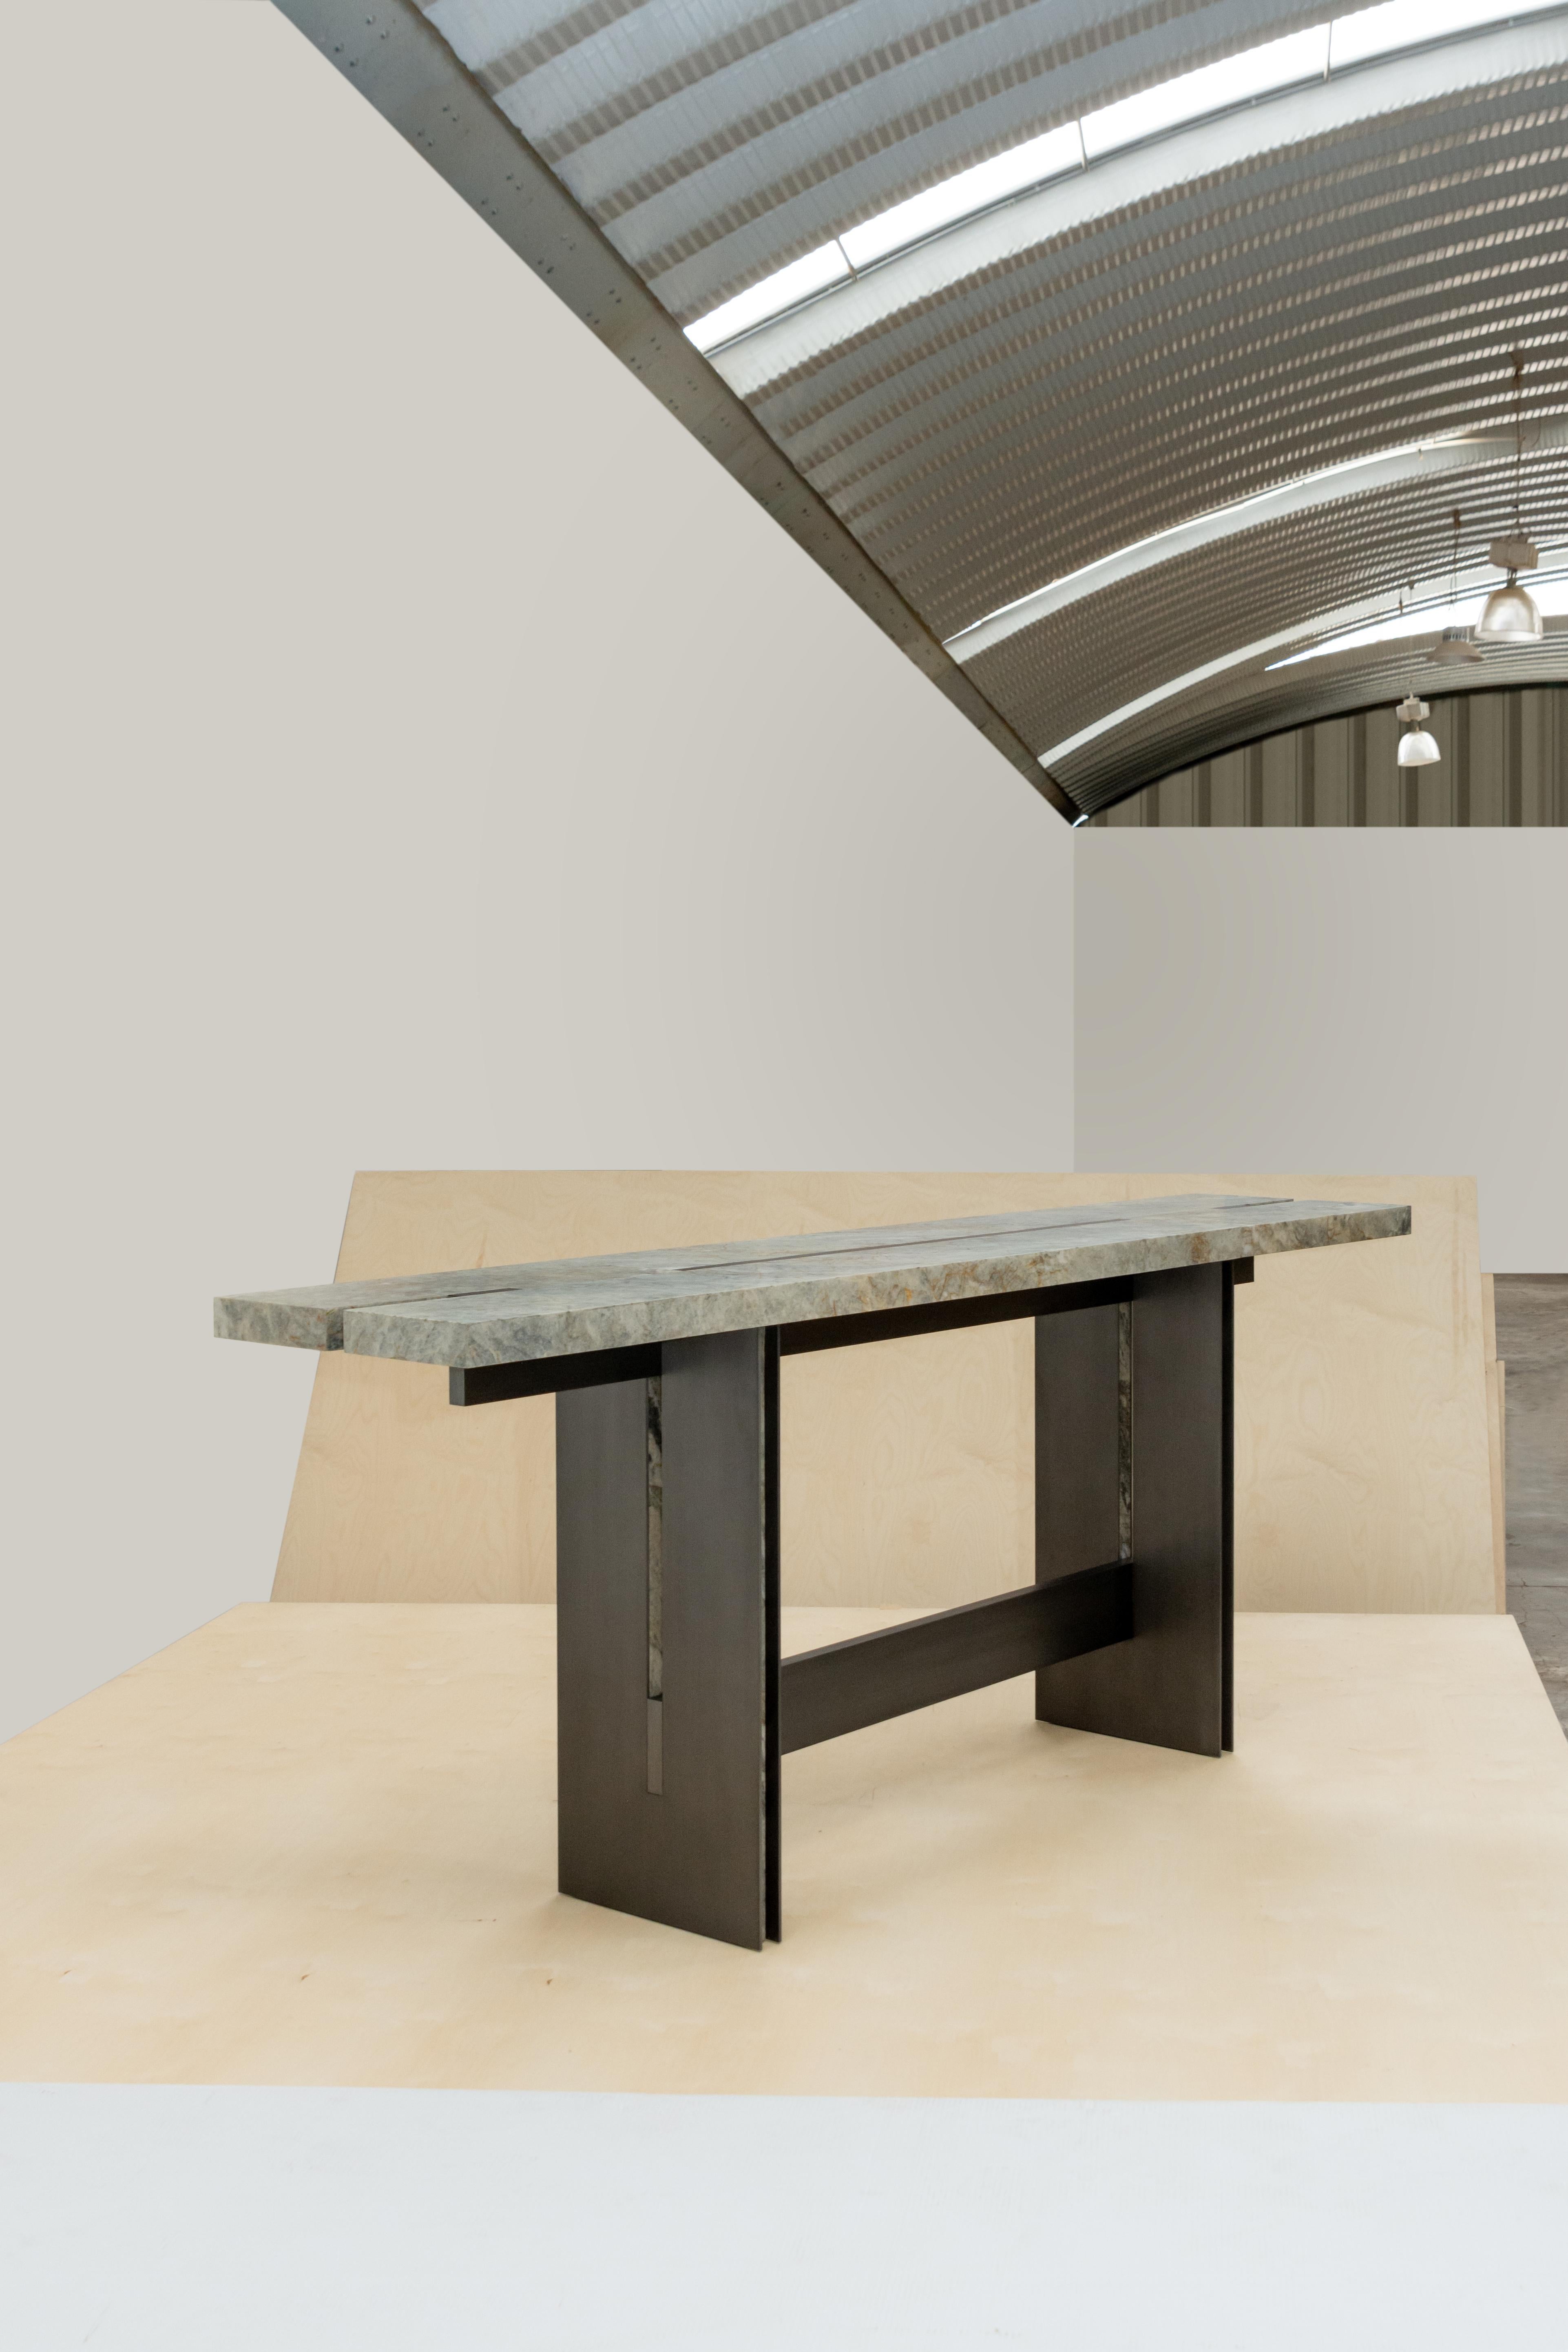 Comunal bar console by Simon Hamui
Dimensions: D290 x W55 x H102 cm
Materials: Stone, Metal
Also available in different dimensions. 
Prices may vary according to the finish chosen.

Bar console in a stone countertop with metal inlays that sits